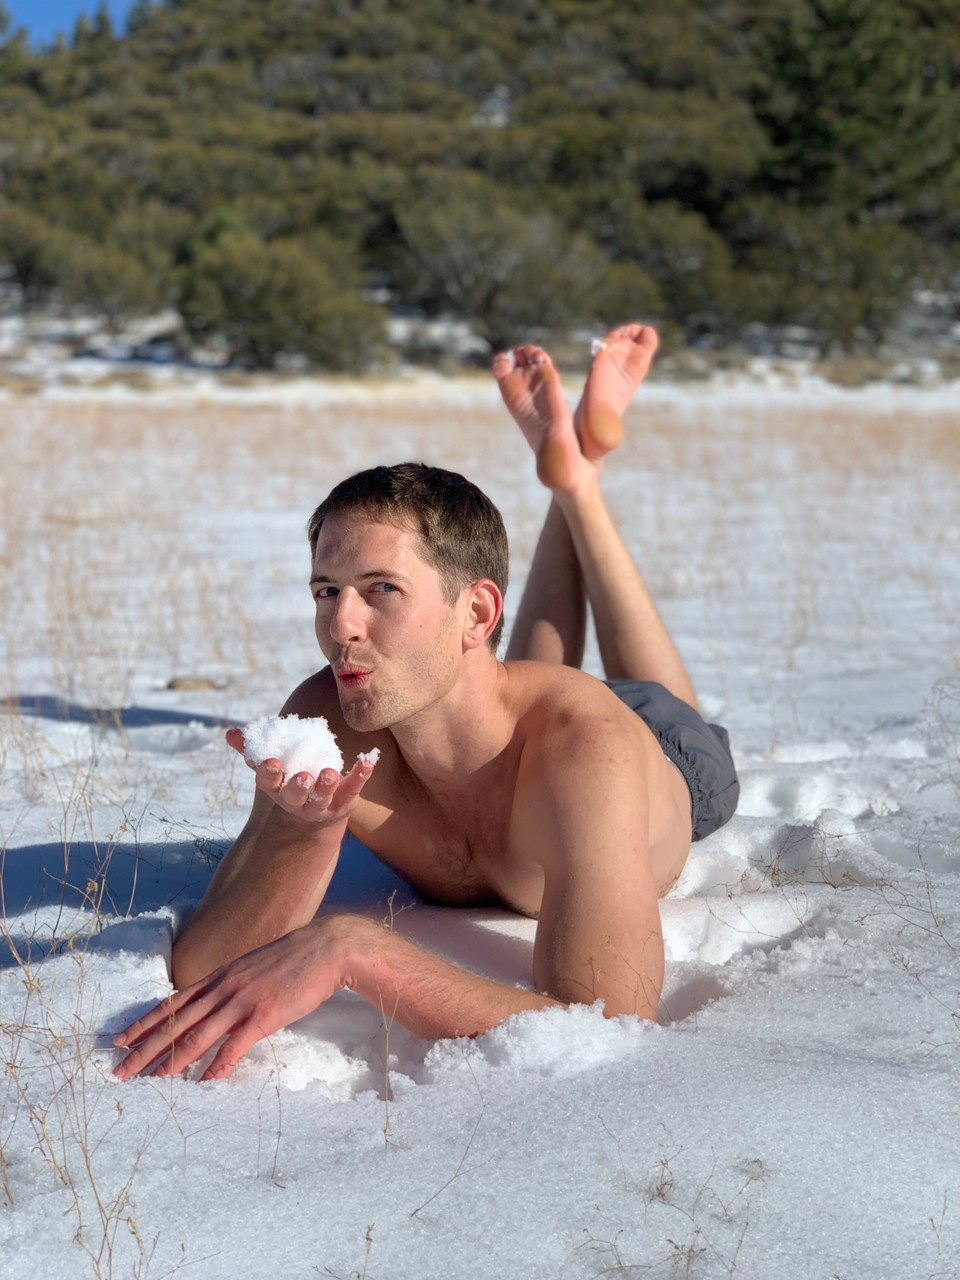 Wim Hof Method: What To Expect From Wim Hof Breathing and Retreats